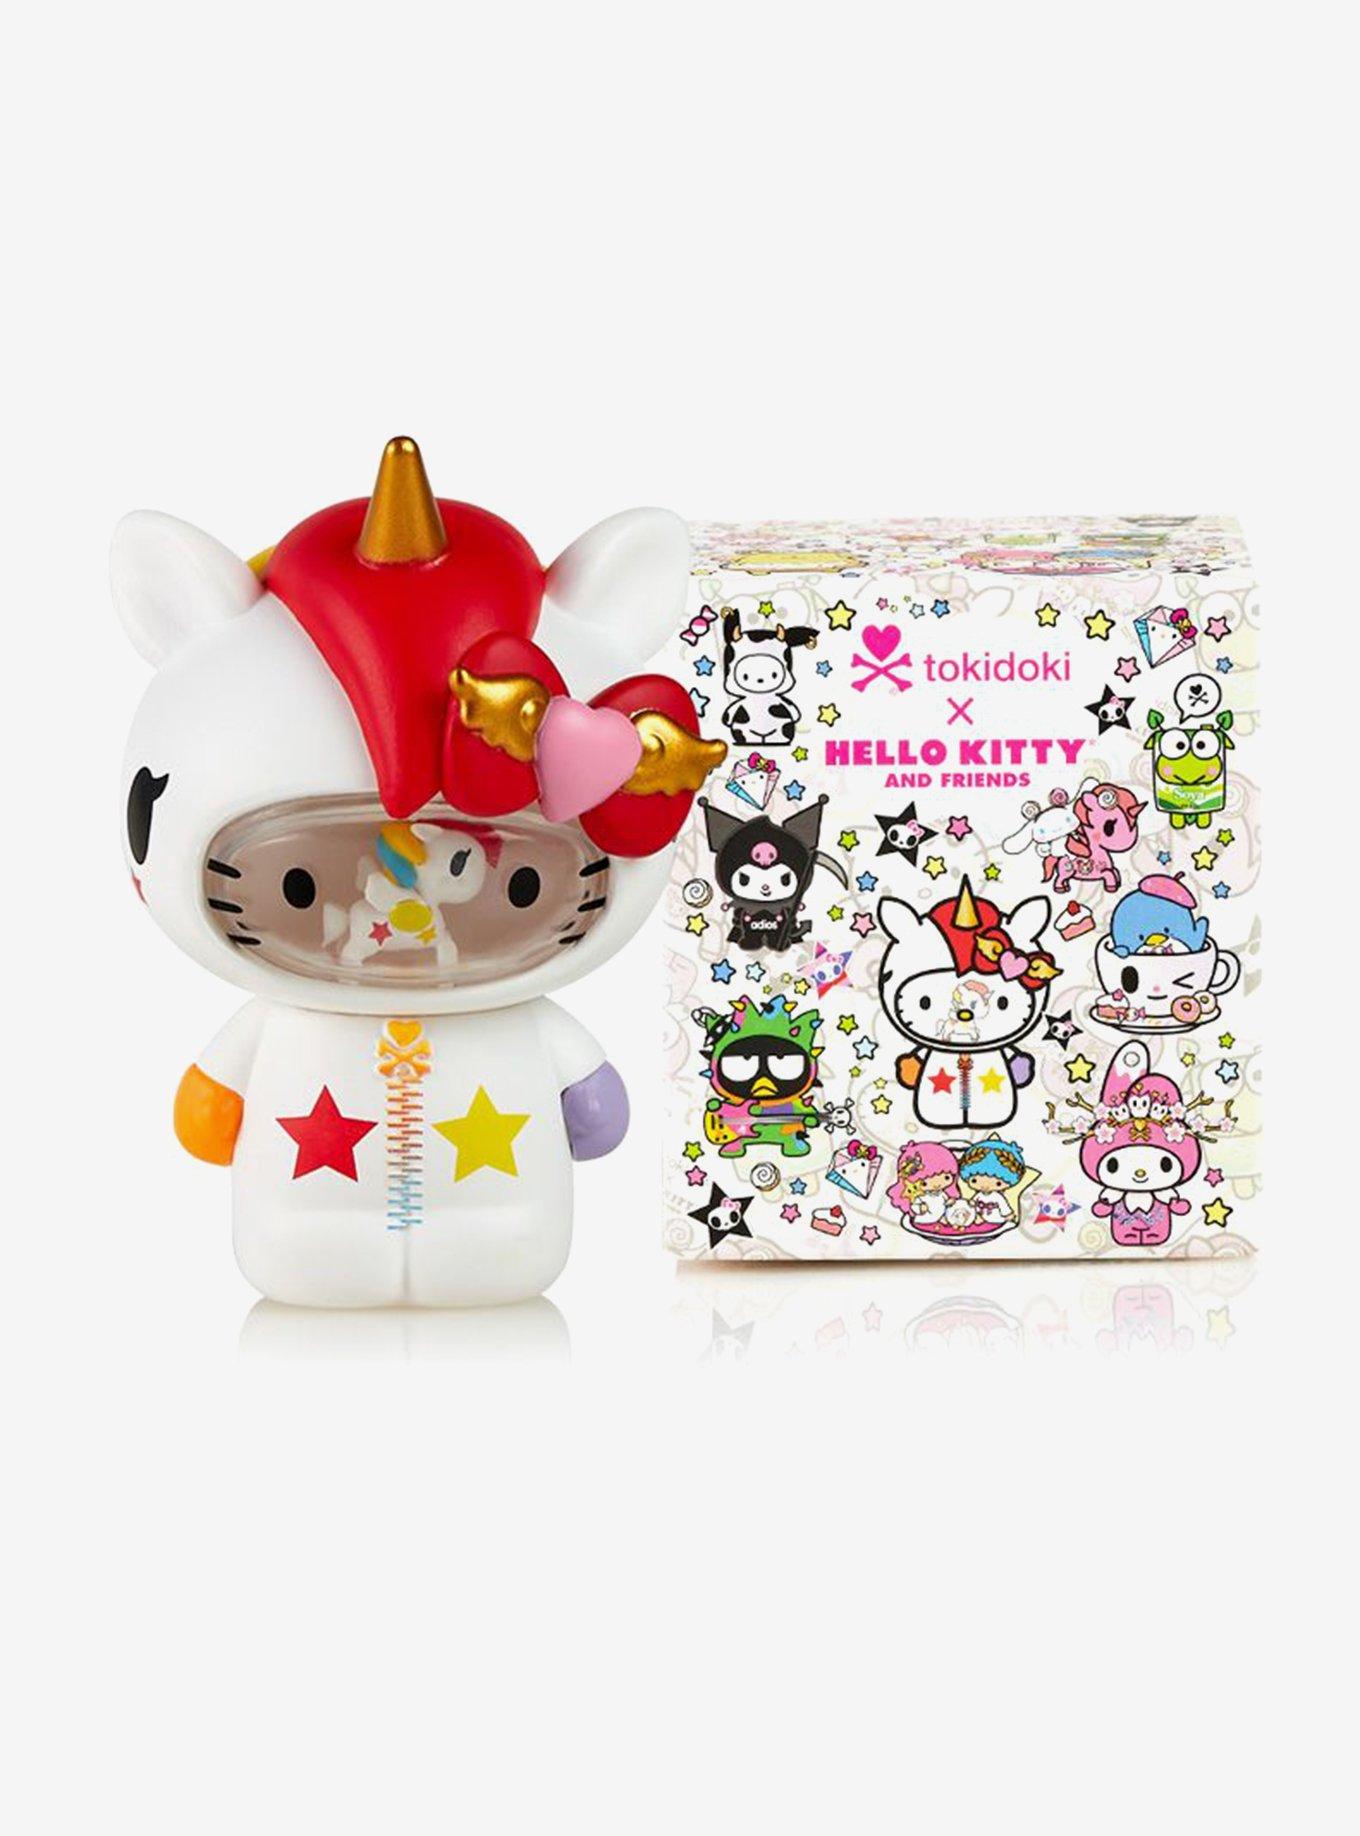 Sanrio Finds at five below: socks, travel pillow, hello kitty patch, shirt,  hat, stepping stone, jewelry tray : r/sanrio